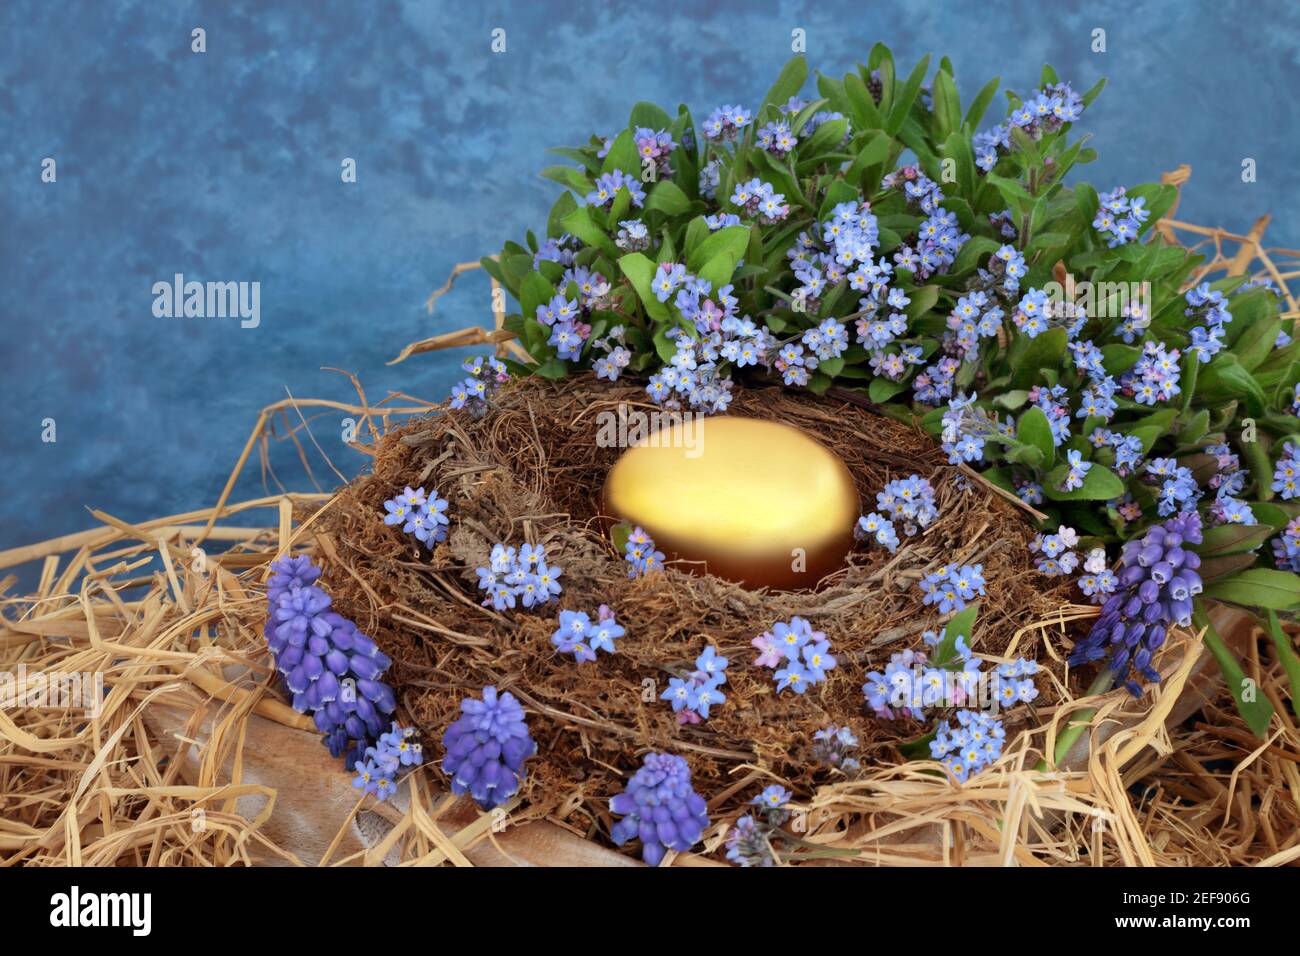 Golden nest egg retirement fund and financial savings concept with gold egg in a natural nest, forget me not & grape hyacinth flowers on mottled blue Stock Photo